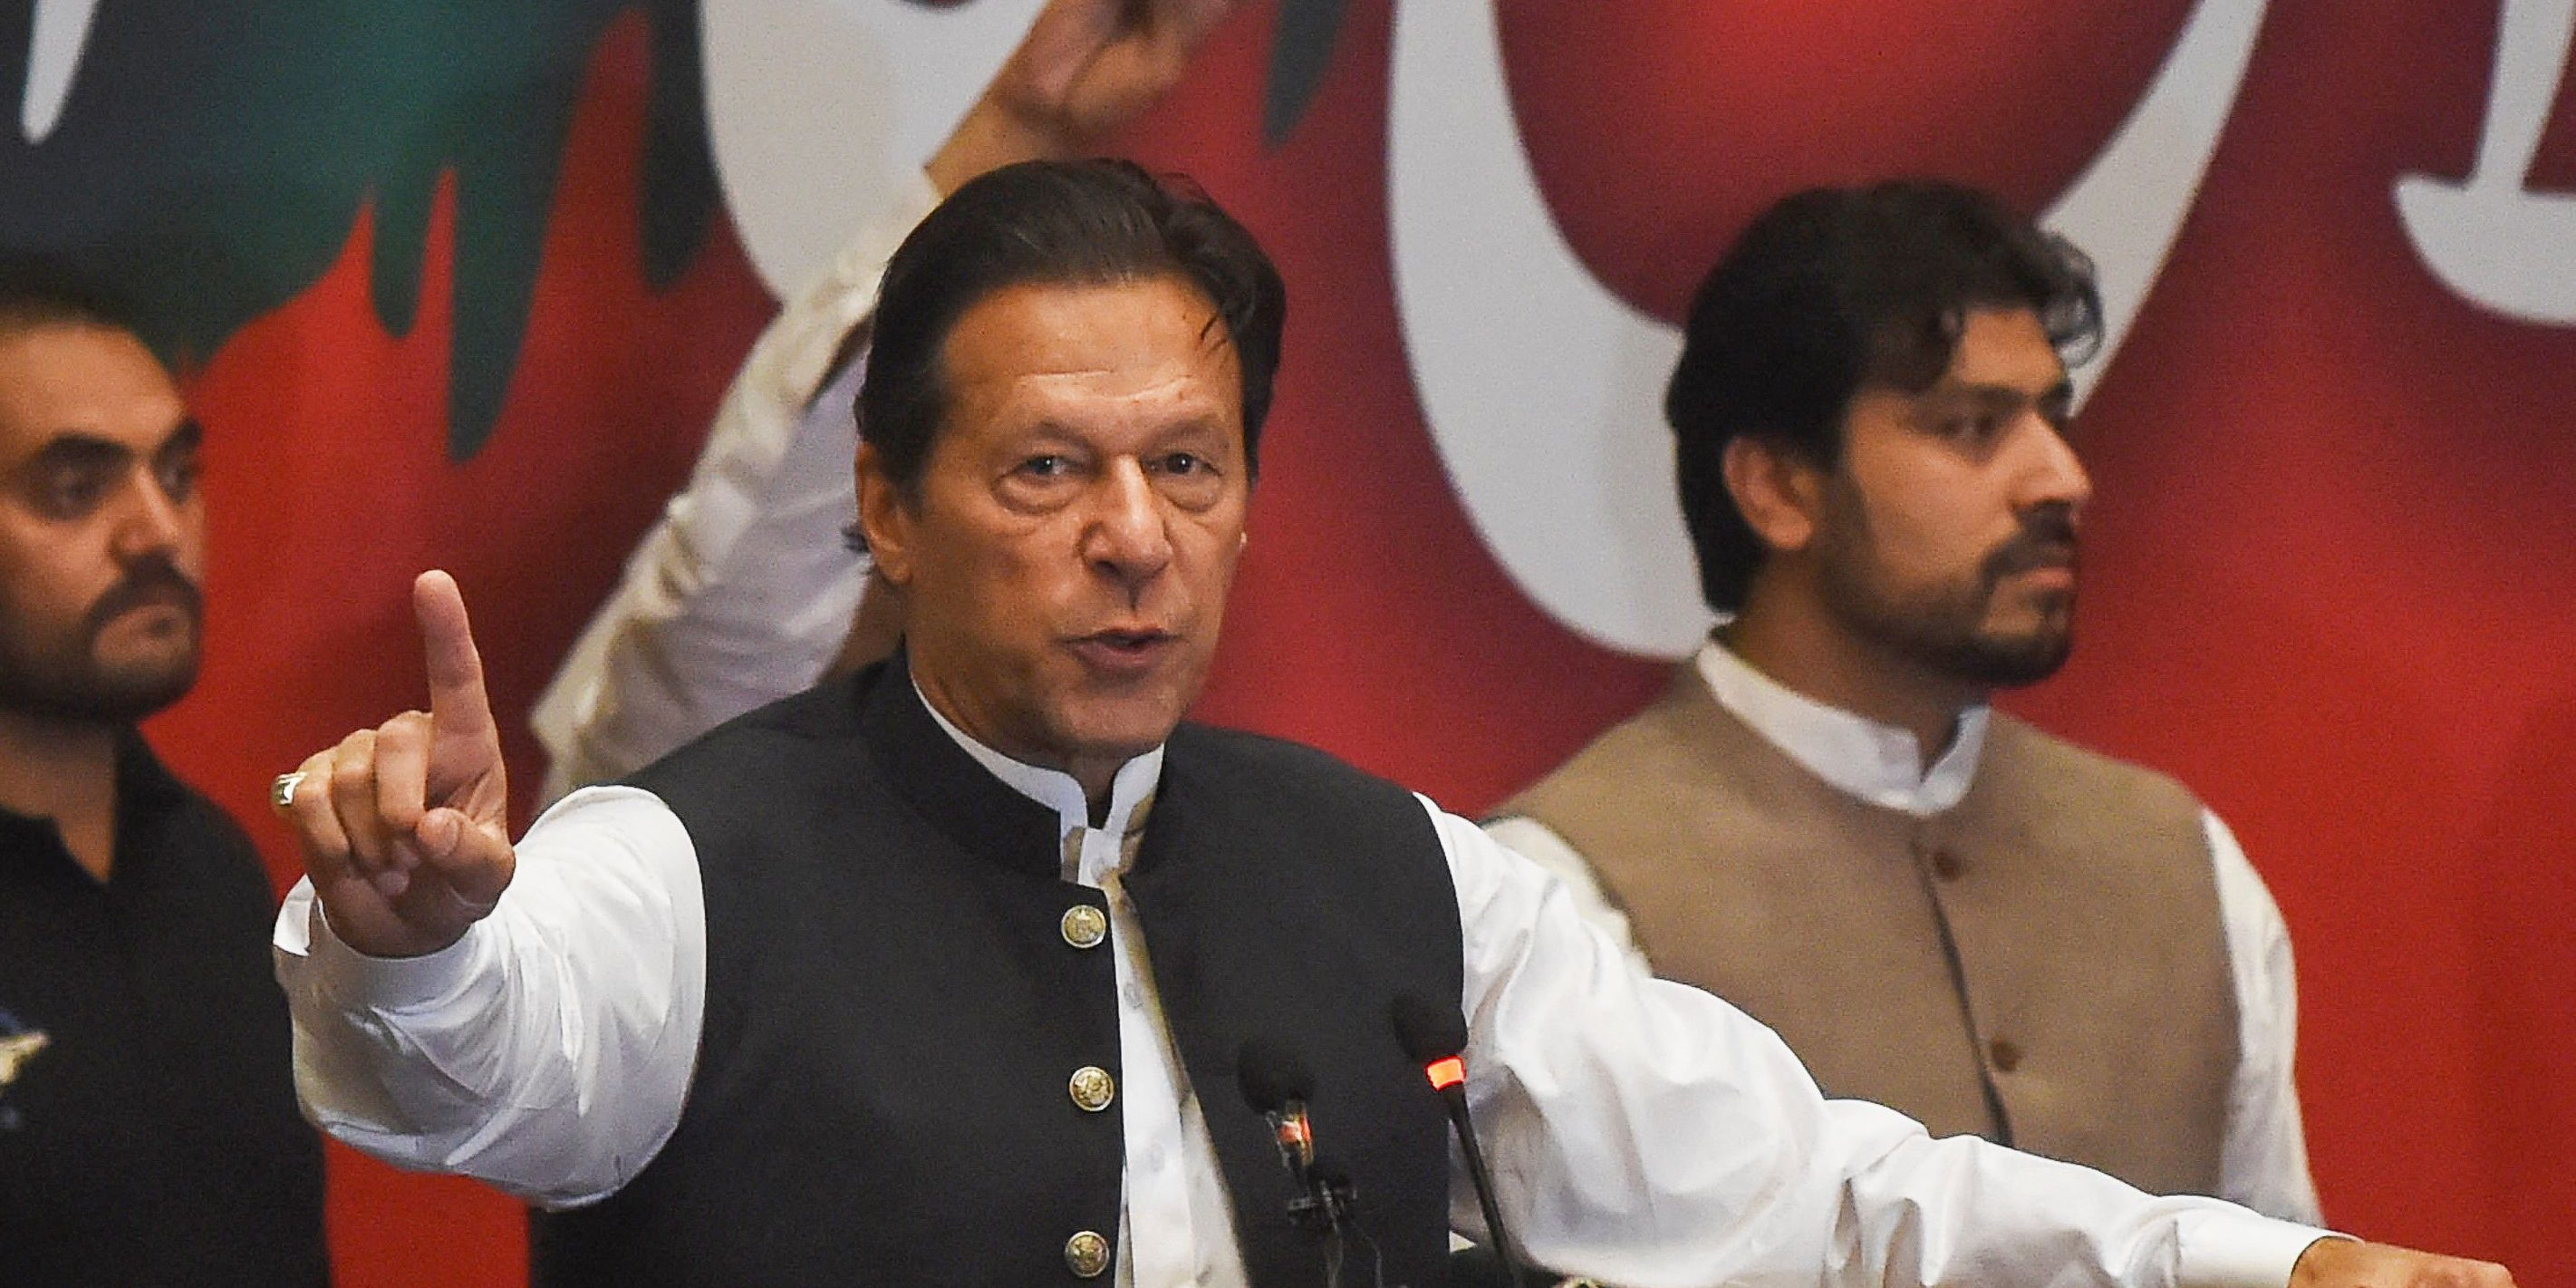 Former Pakistan's prime minister Imran Khan, who was ousted by opposition parties through a no-confidence motion, gestures as he addresses Pakistan Tehreek-e-Insaf (PTI) party workers during a party convention in Lahore on April 27, 2022. (Photo by Arif ALI / AFP) (Photo by ARIF ALI/AFP via Getty Images)